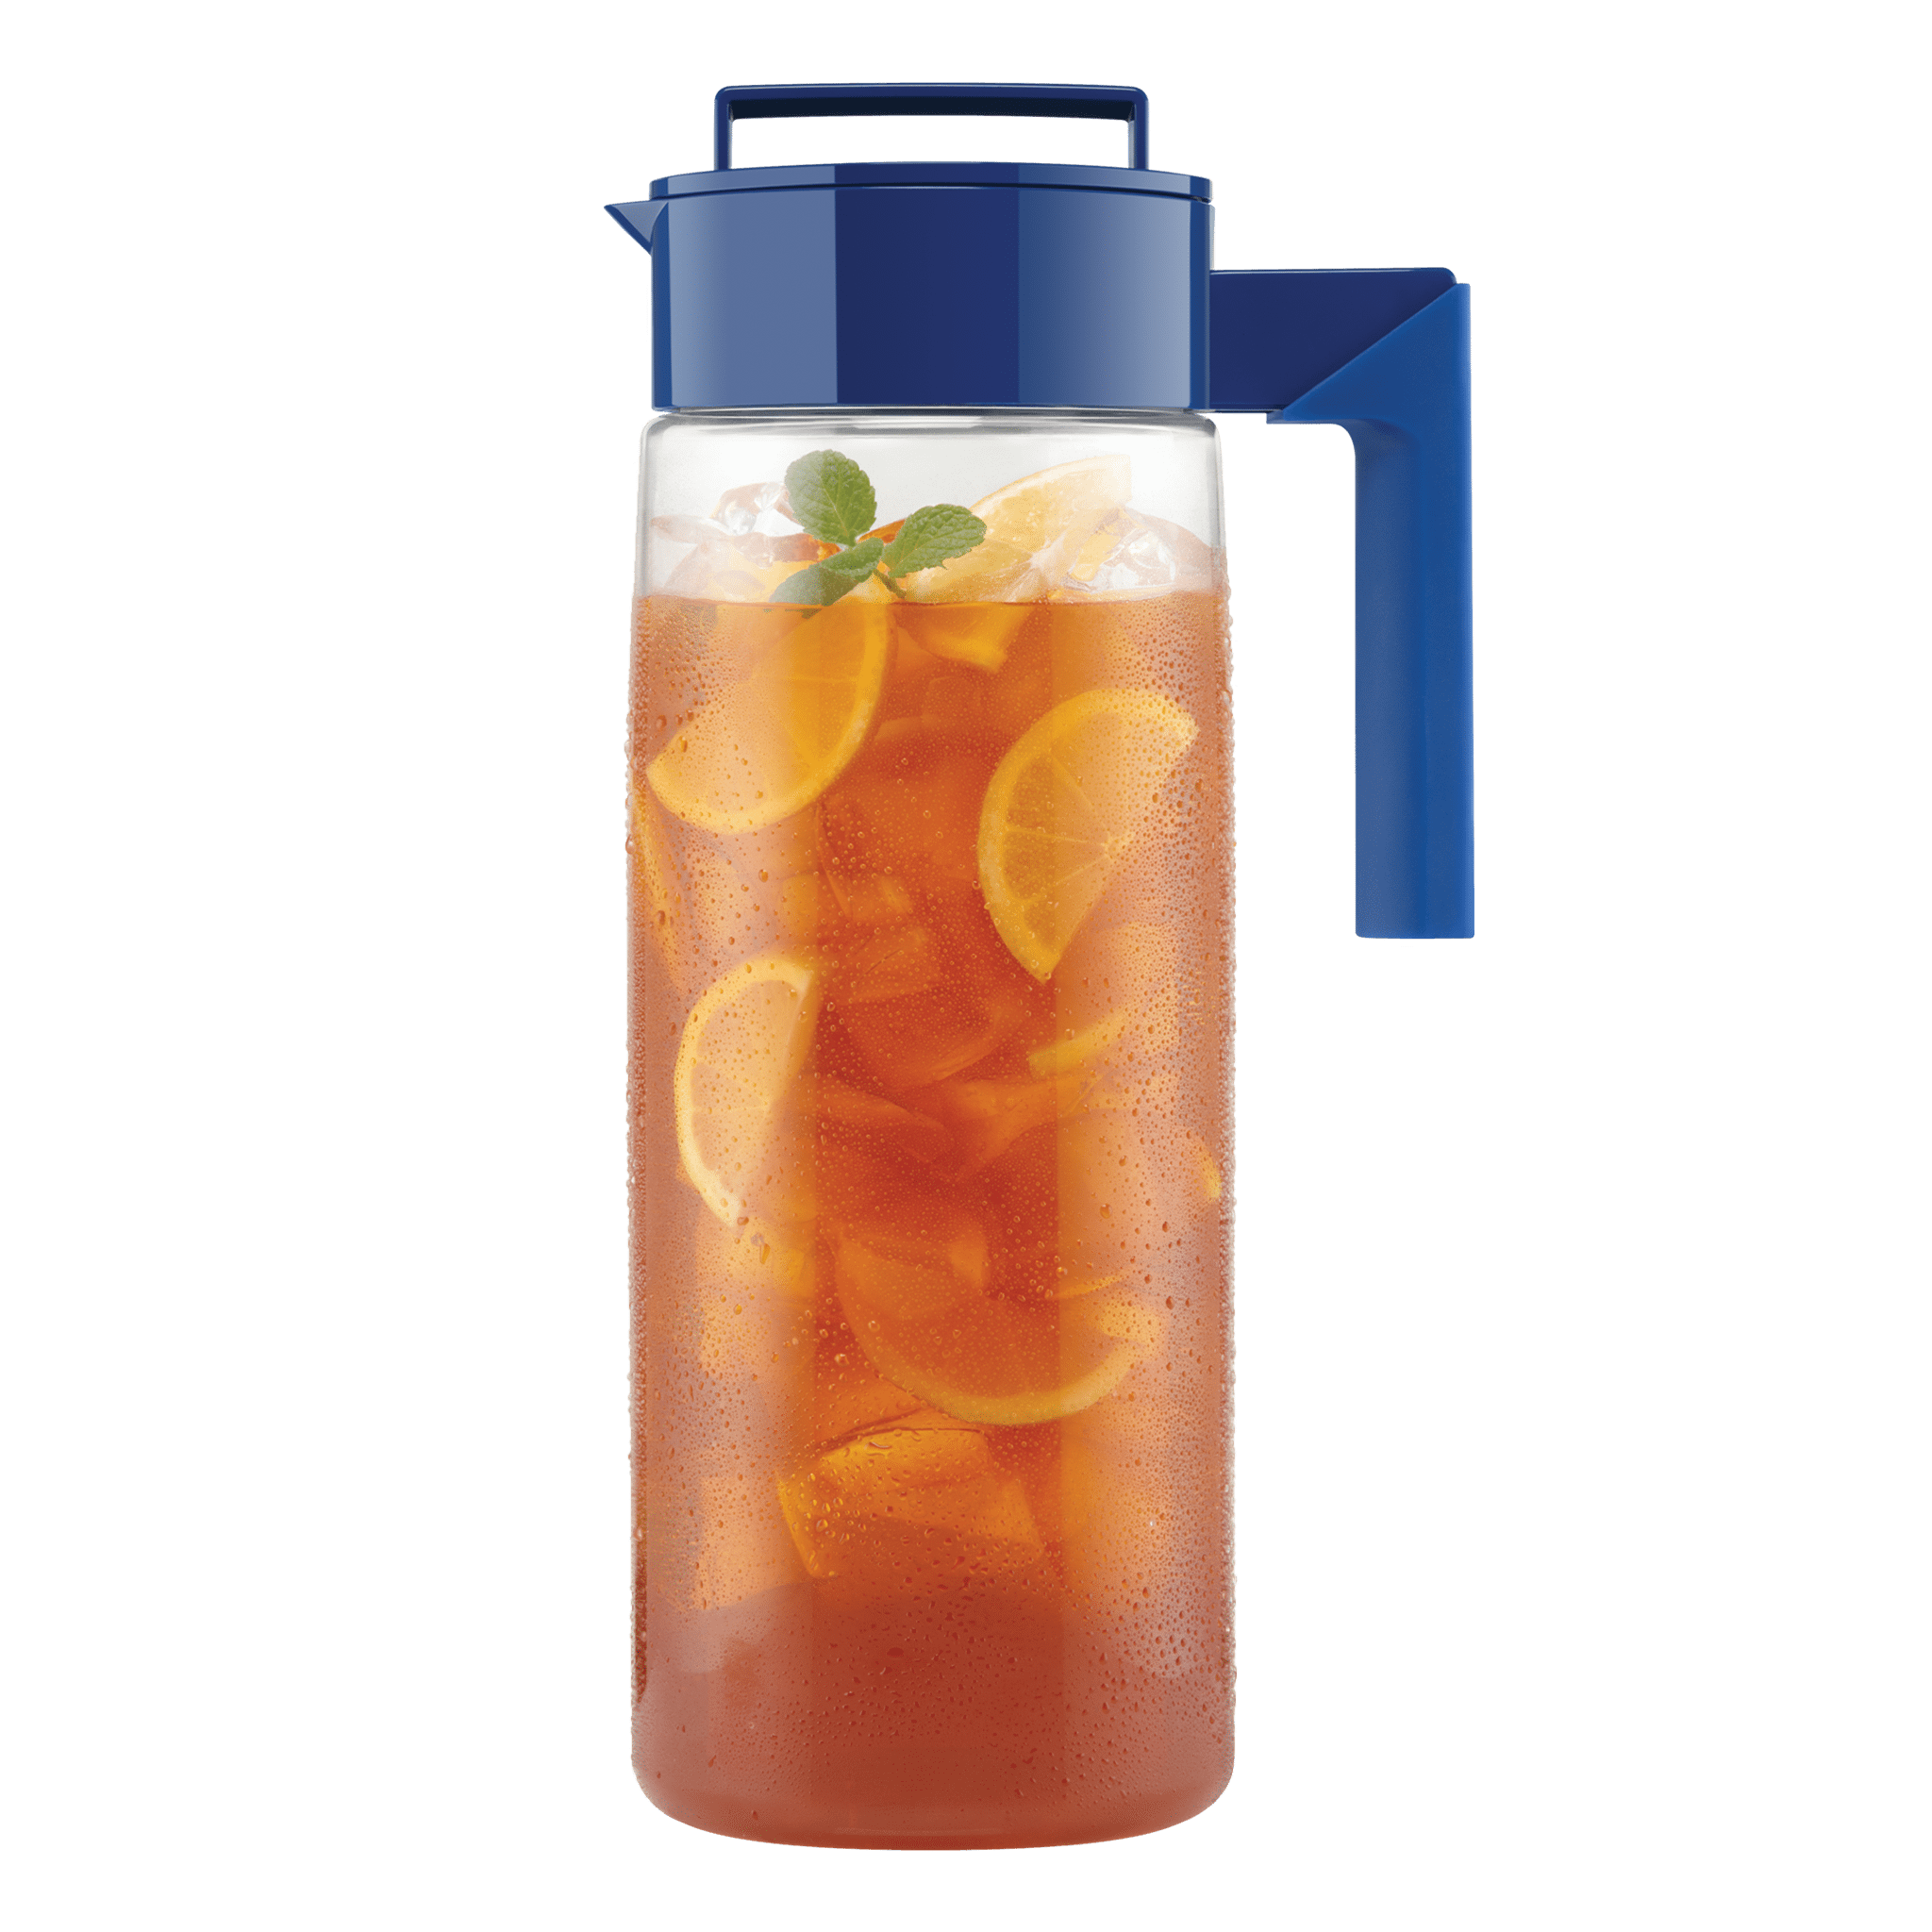 Water & Juice Pitcher BPA-Free With Airtight Lid Twist and Pour Komax Tritan Clear Large 2.1 quart